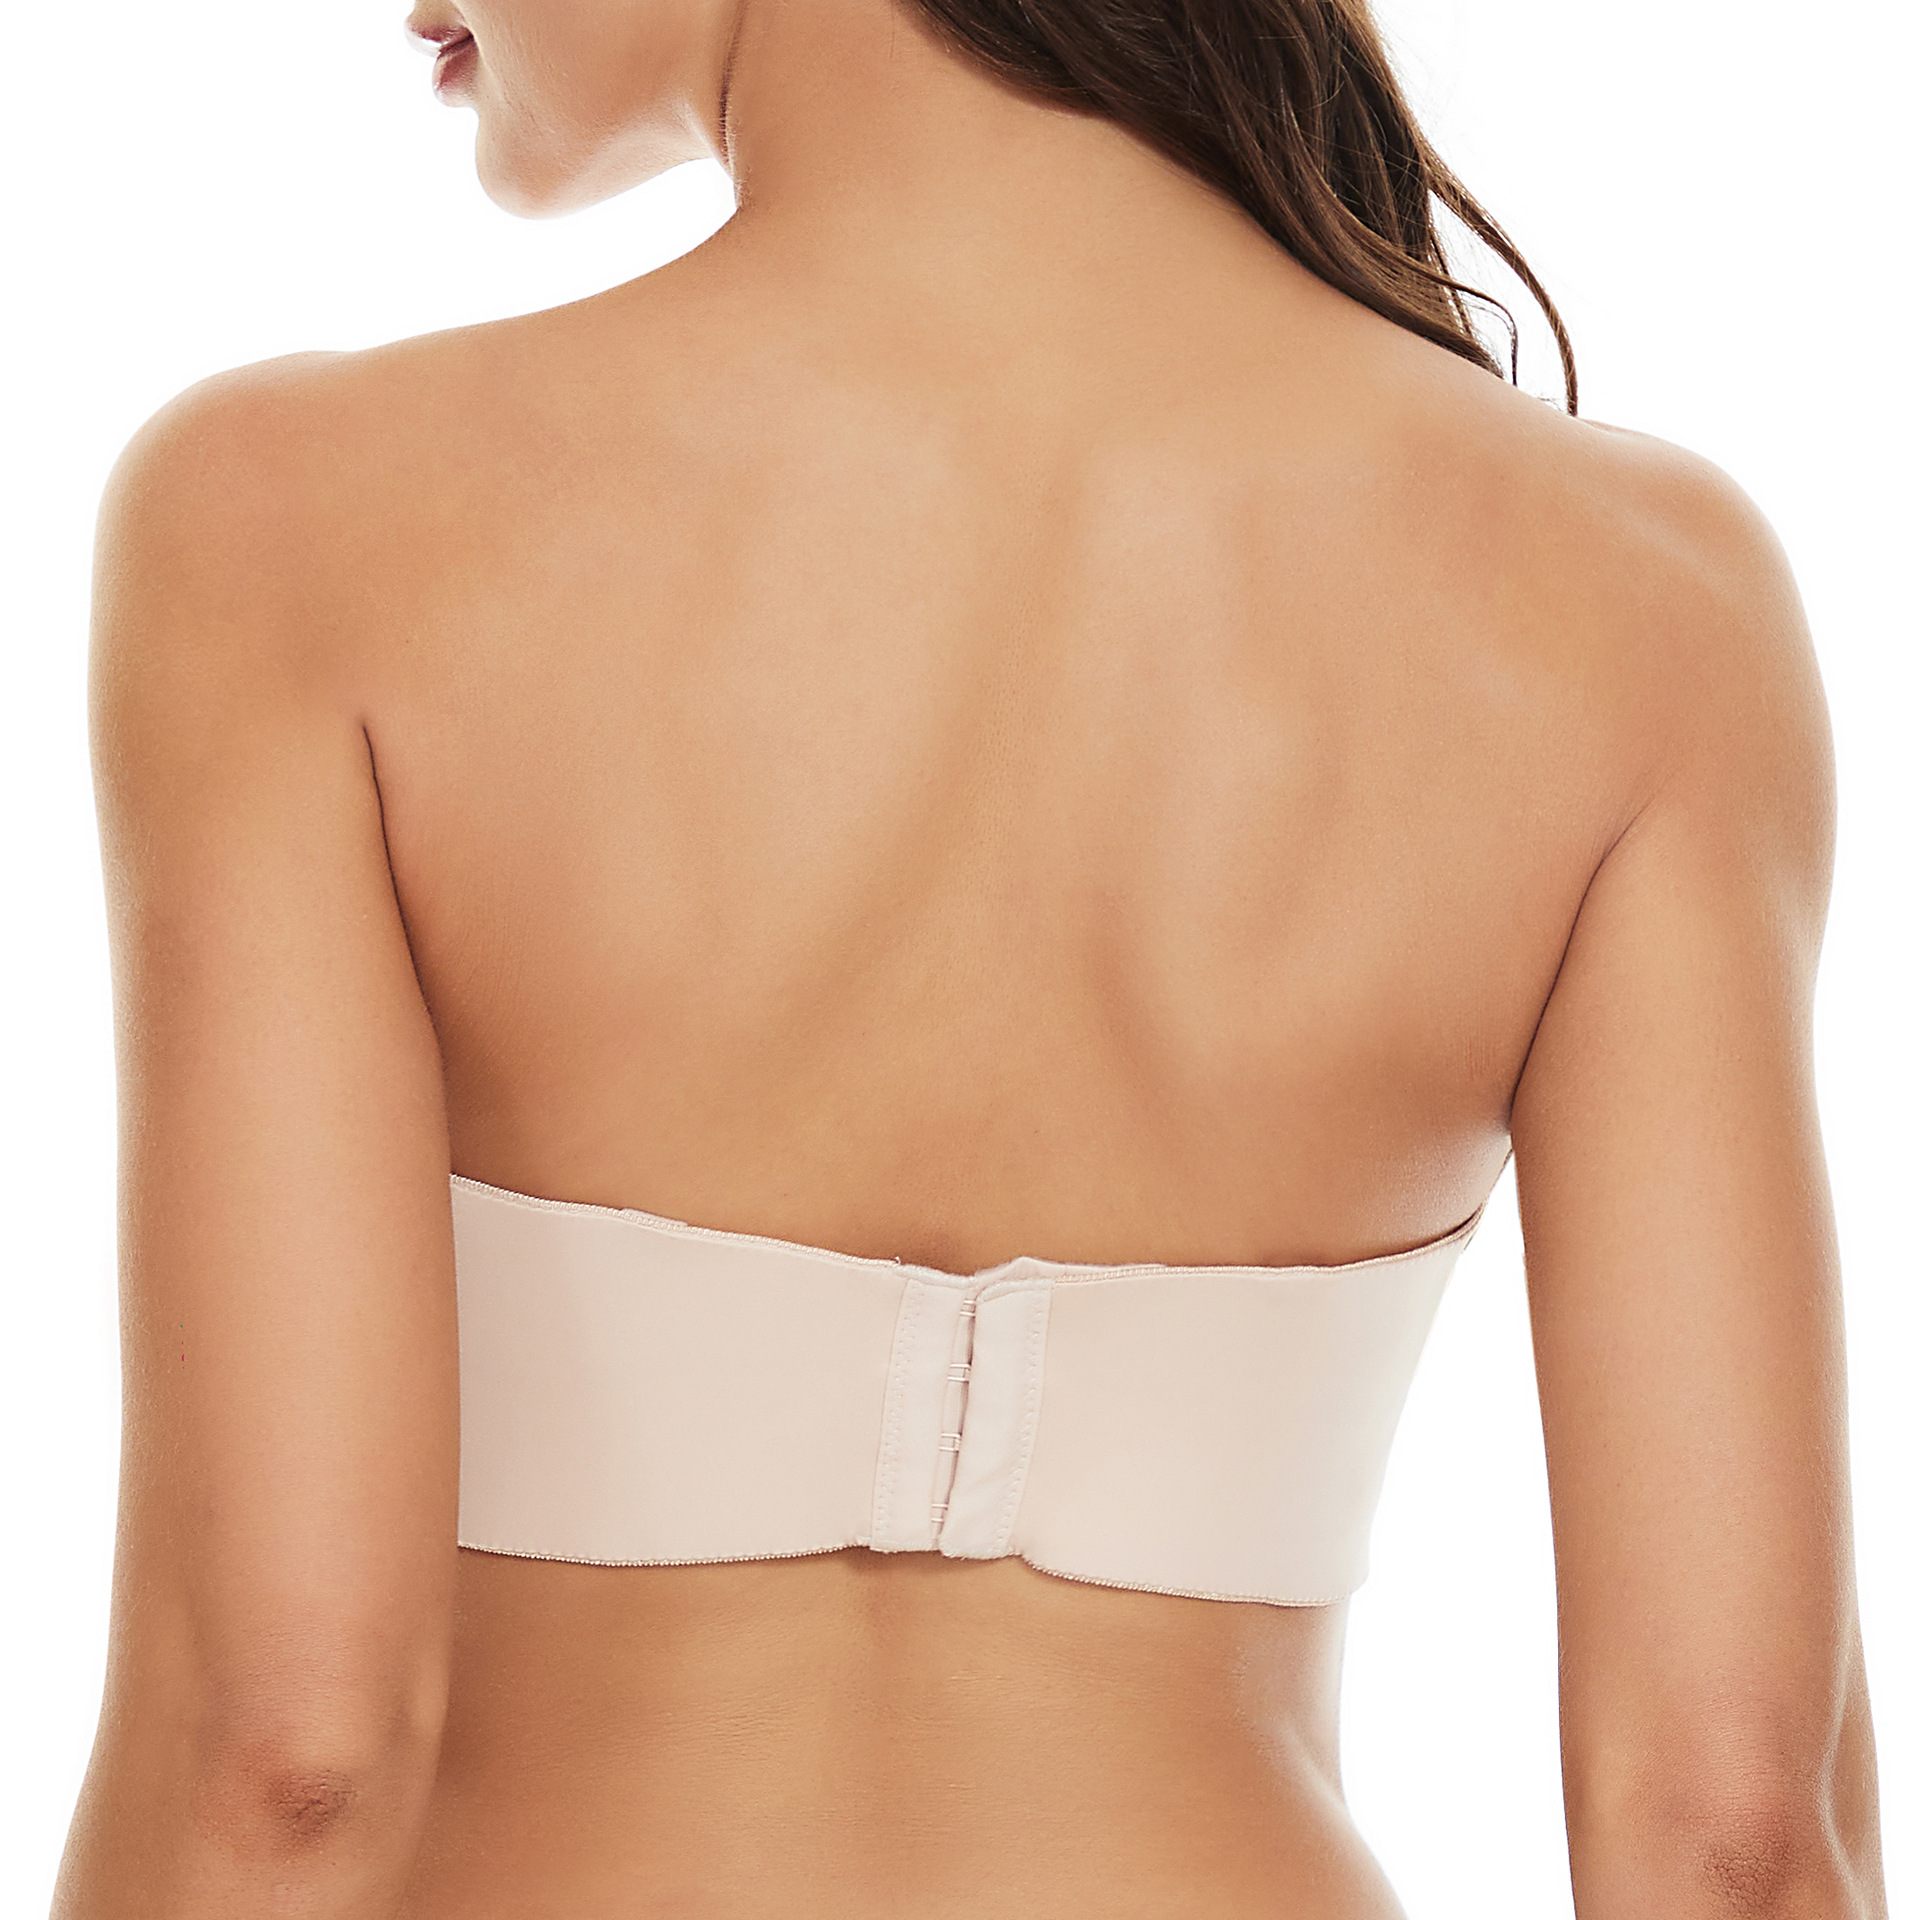 🎁Last Day Promotion- SAVE 70%🎉Nakans Full Support Non-Slip Convertible Bandeau Bra